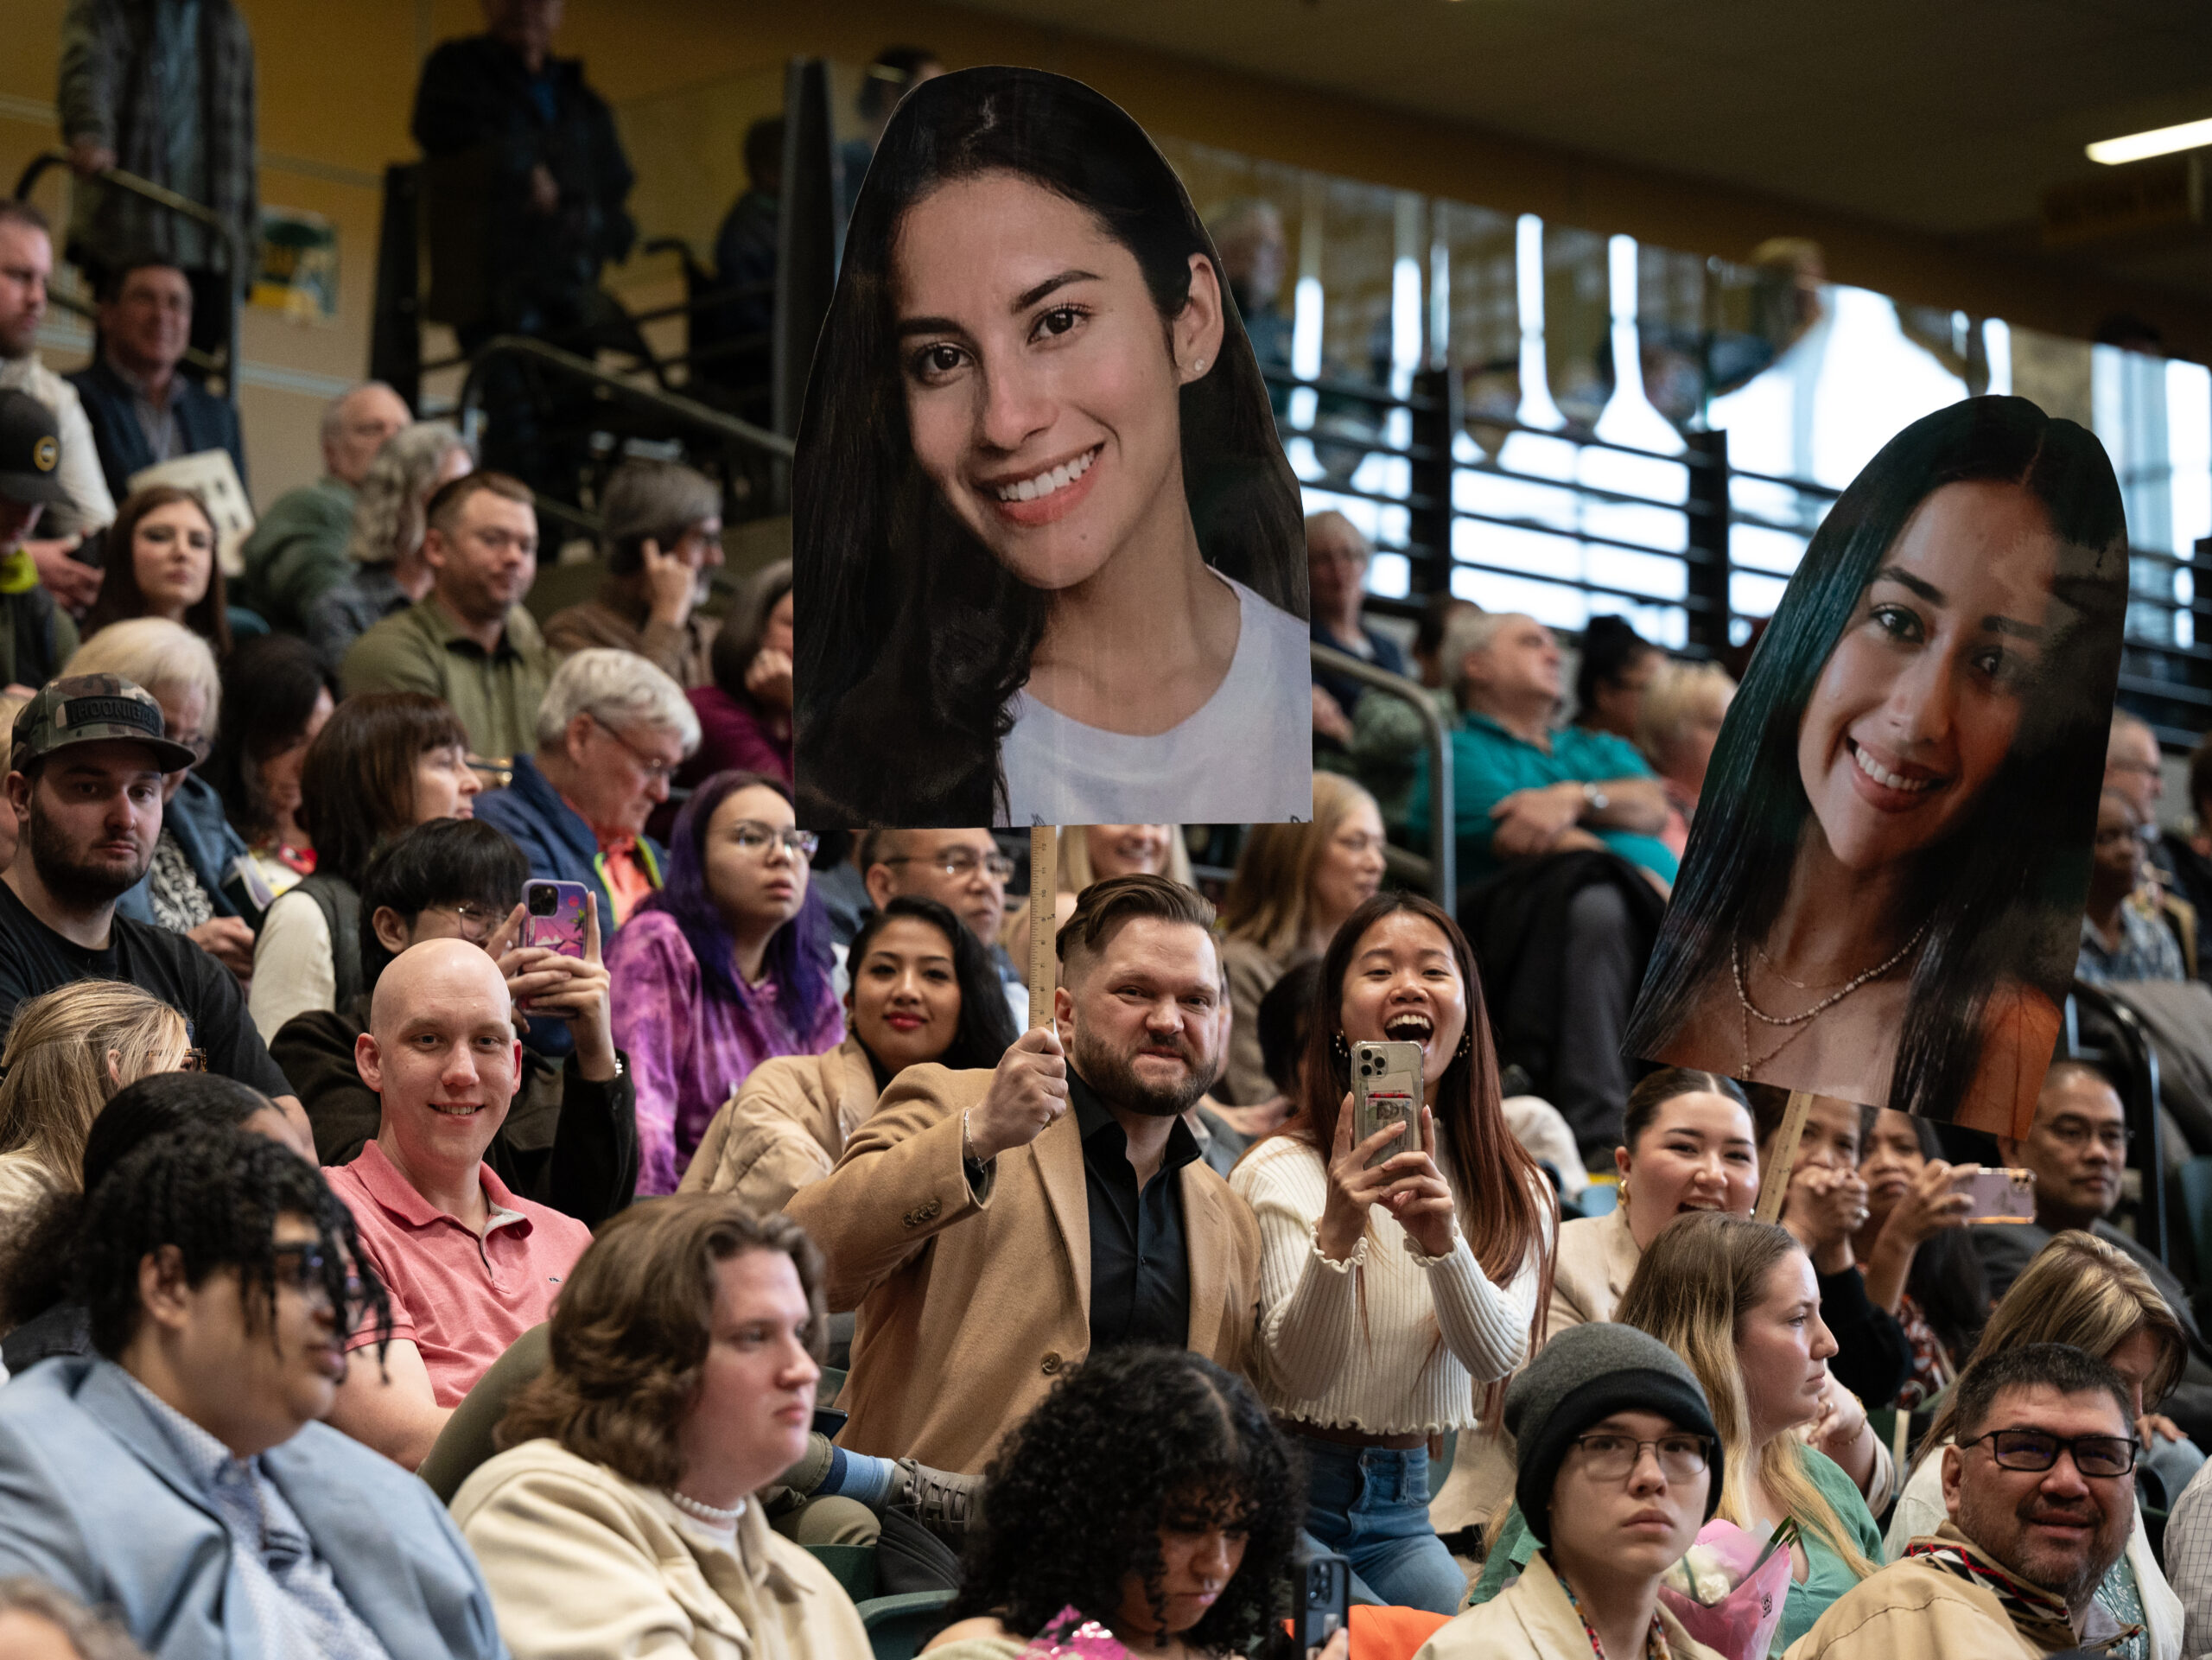 people hold cardboard cutouts of a person's head in the air at a graduation, while cheering